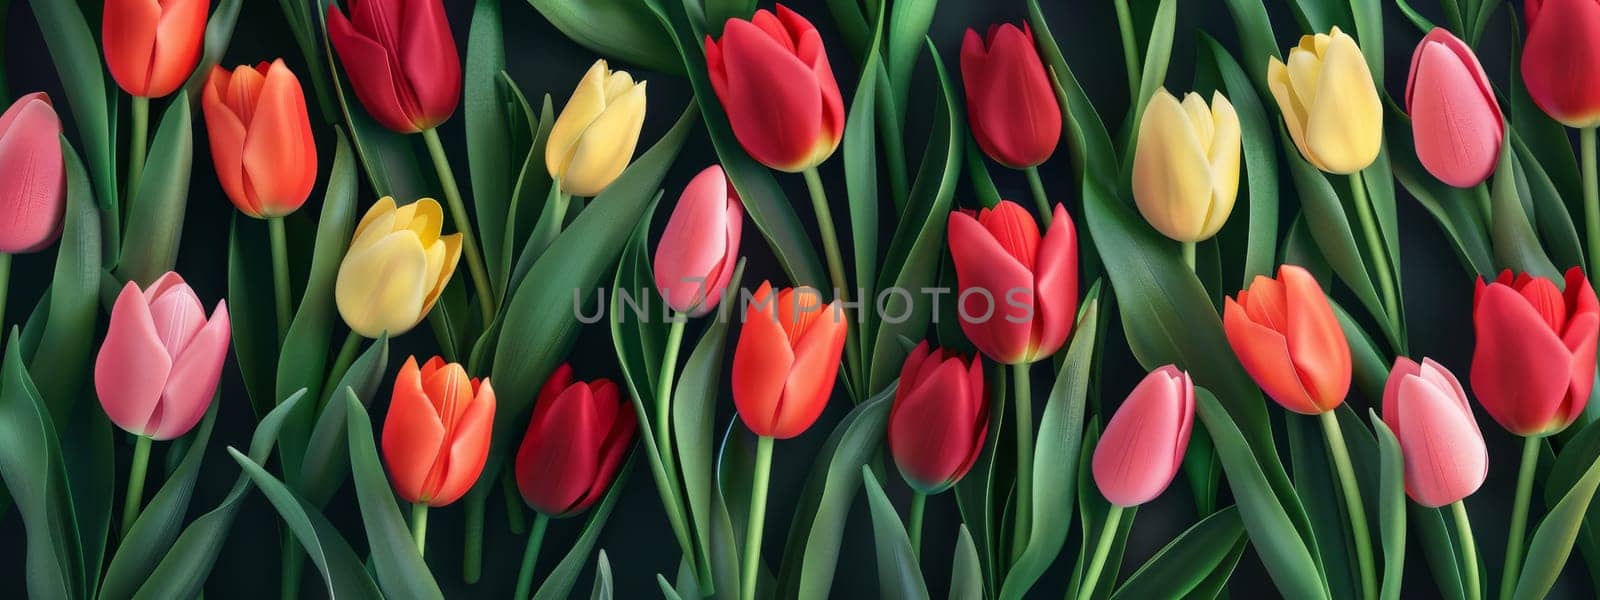 Tulips as a spring background or texture, top view concept